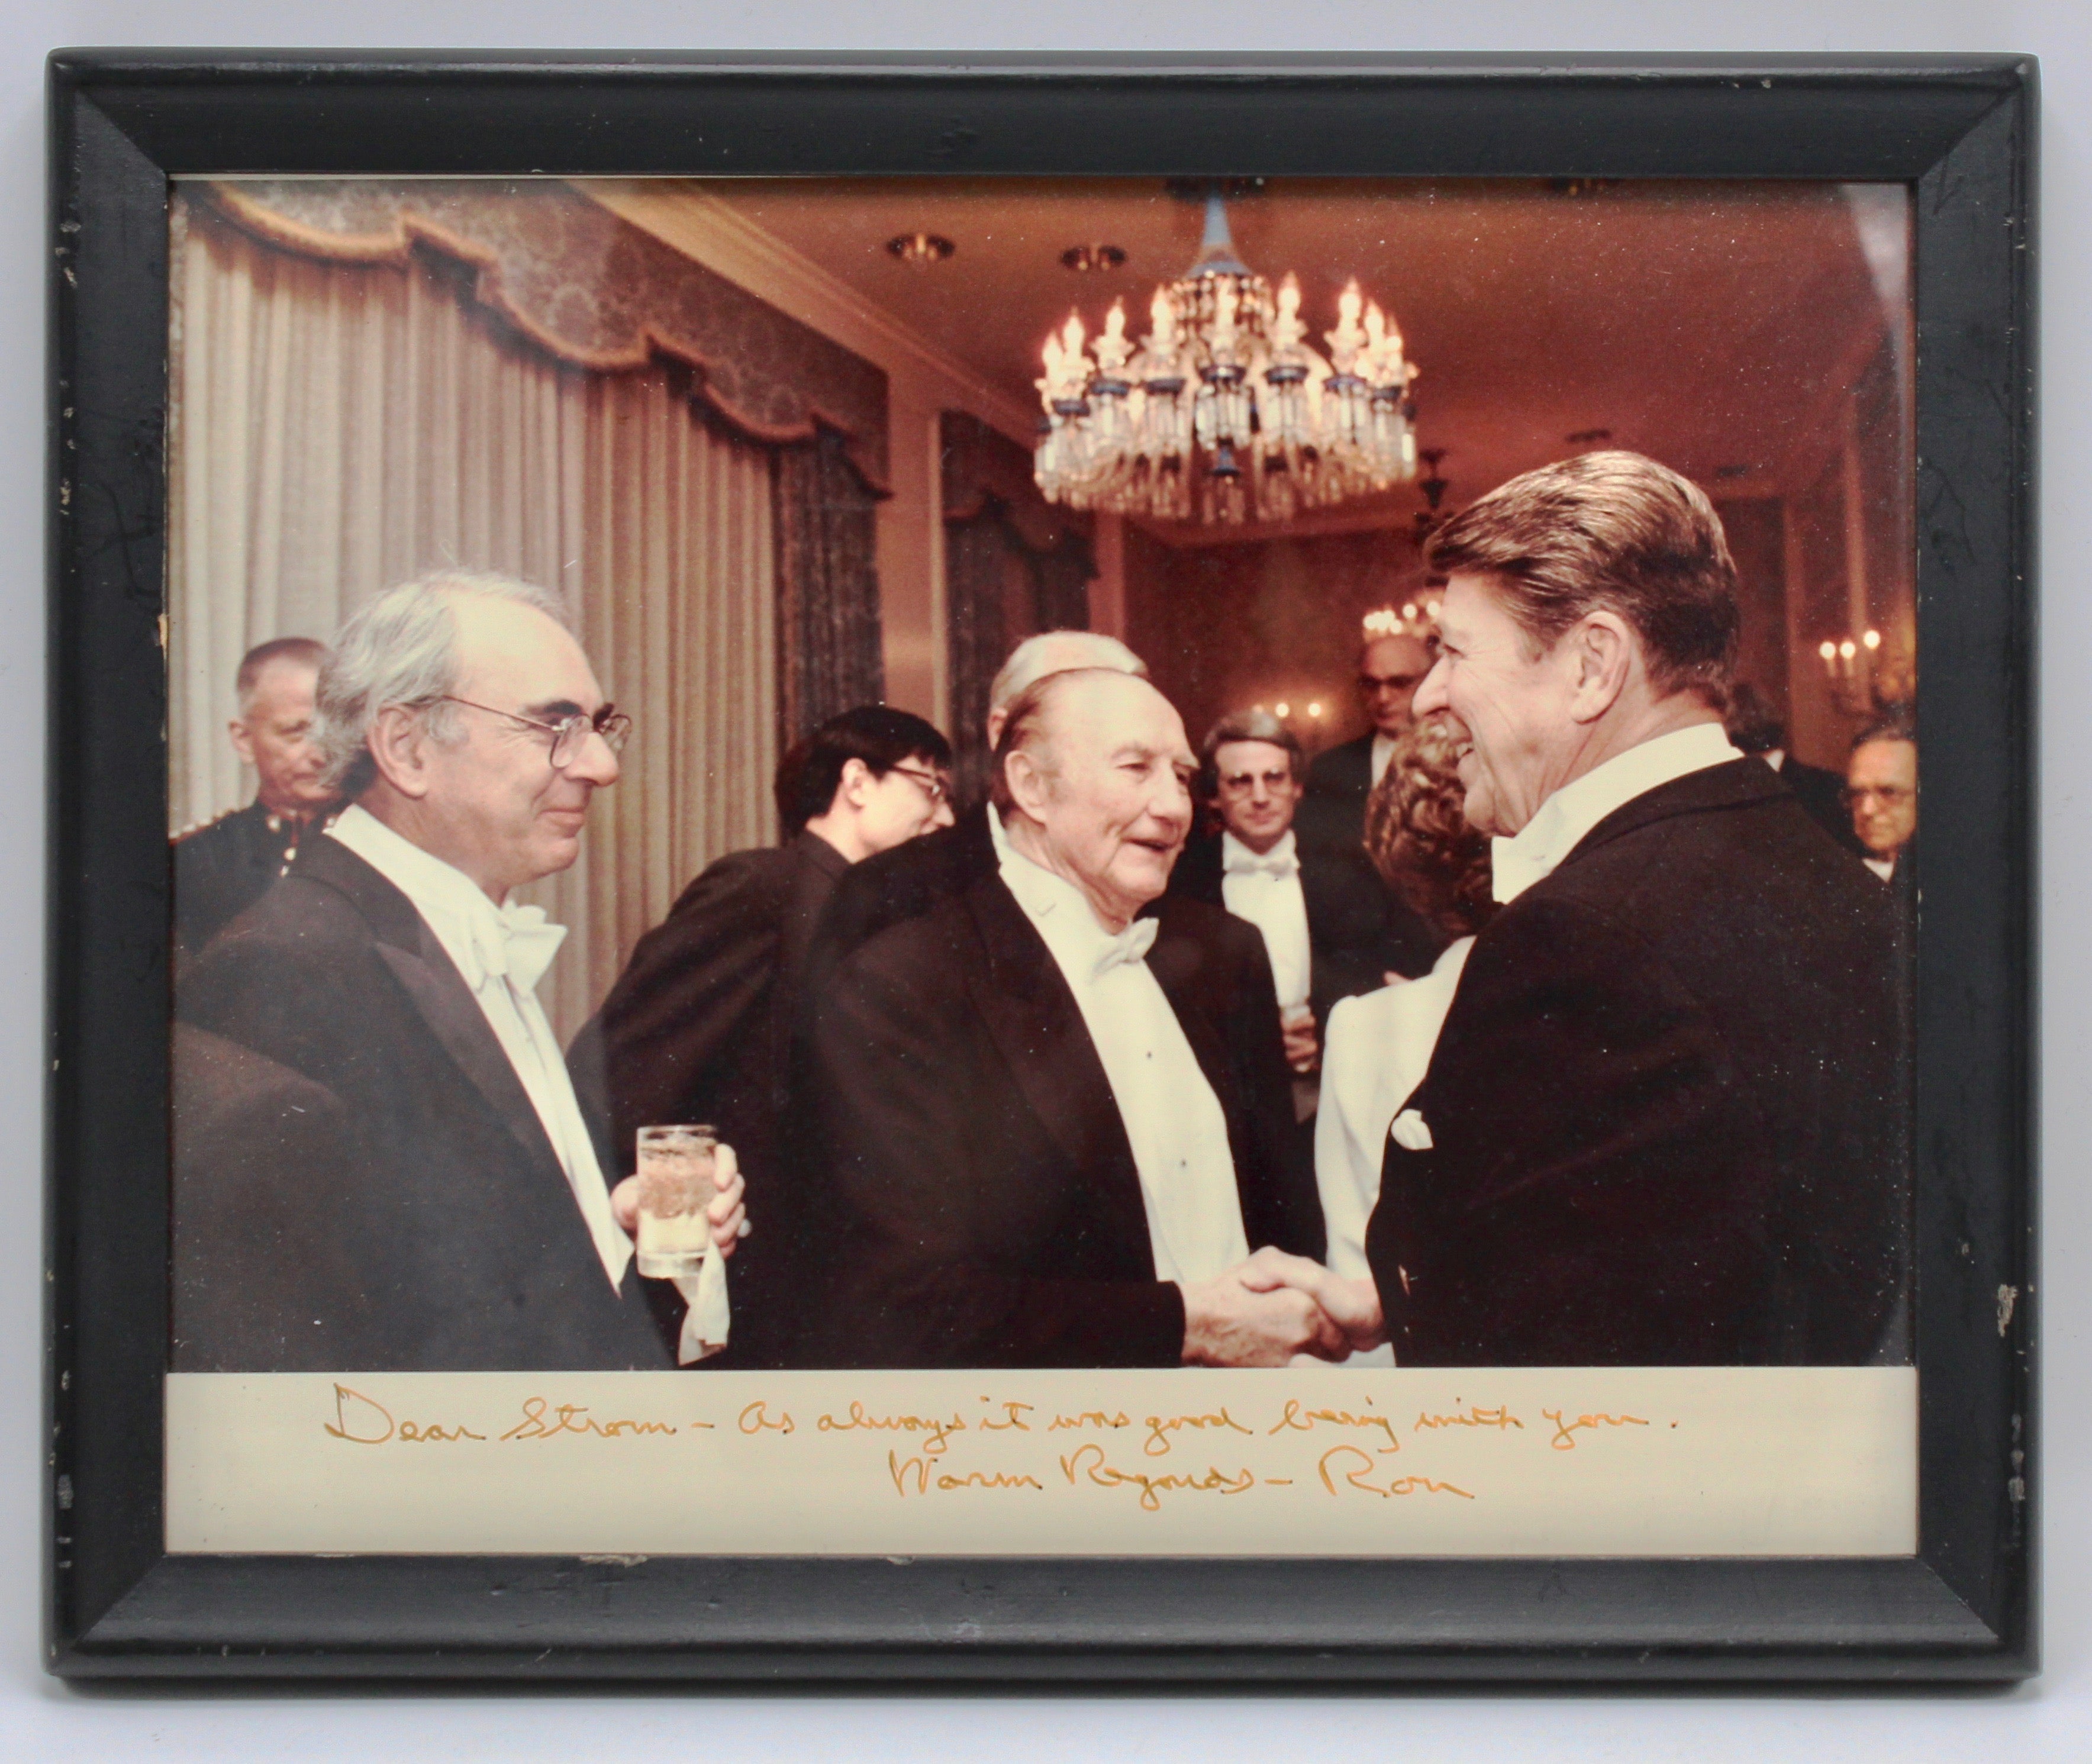 Ronald Reagan and Strom Thurmond Handshake Photograph, Inscribed and Signed by Reagan